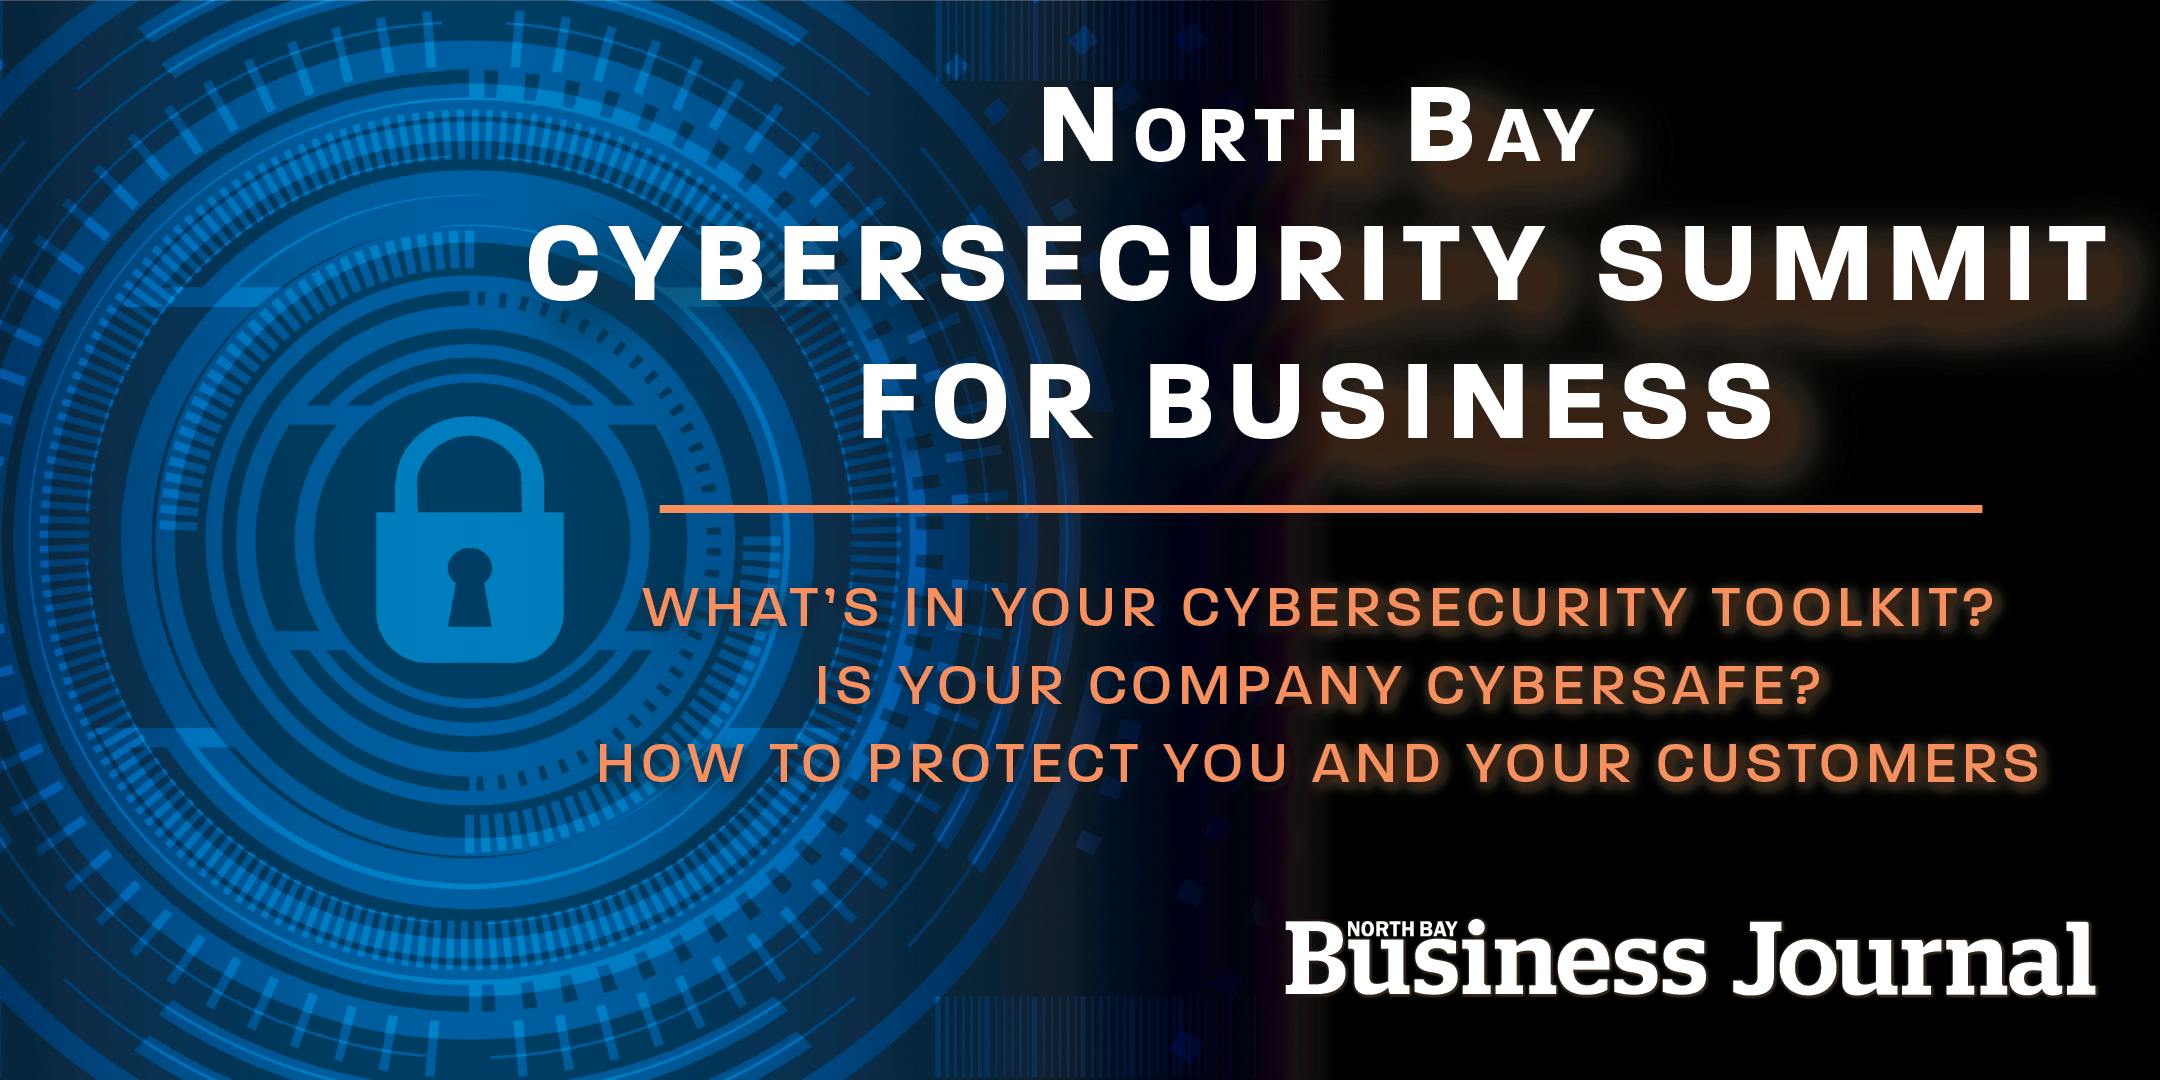 Cybersecurity Summit for Business